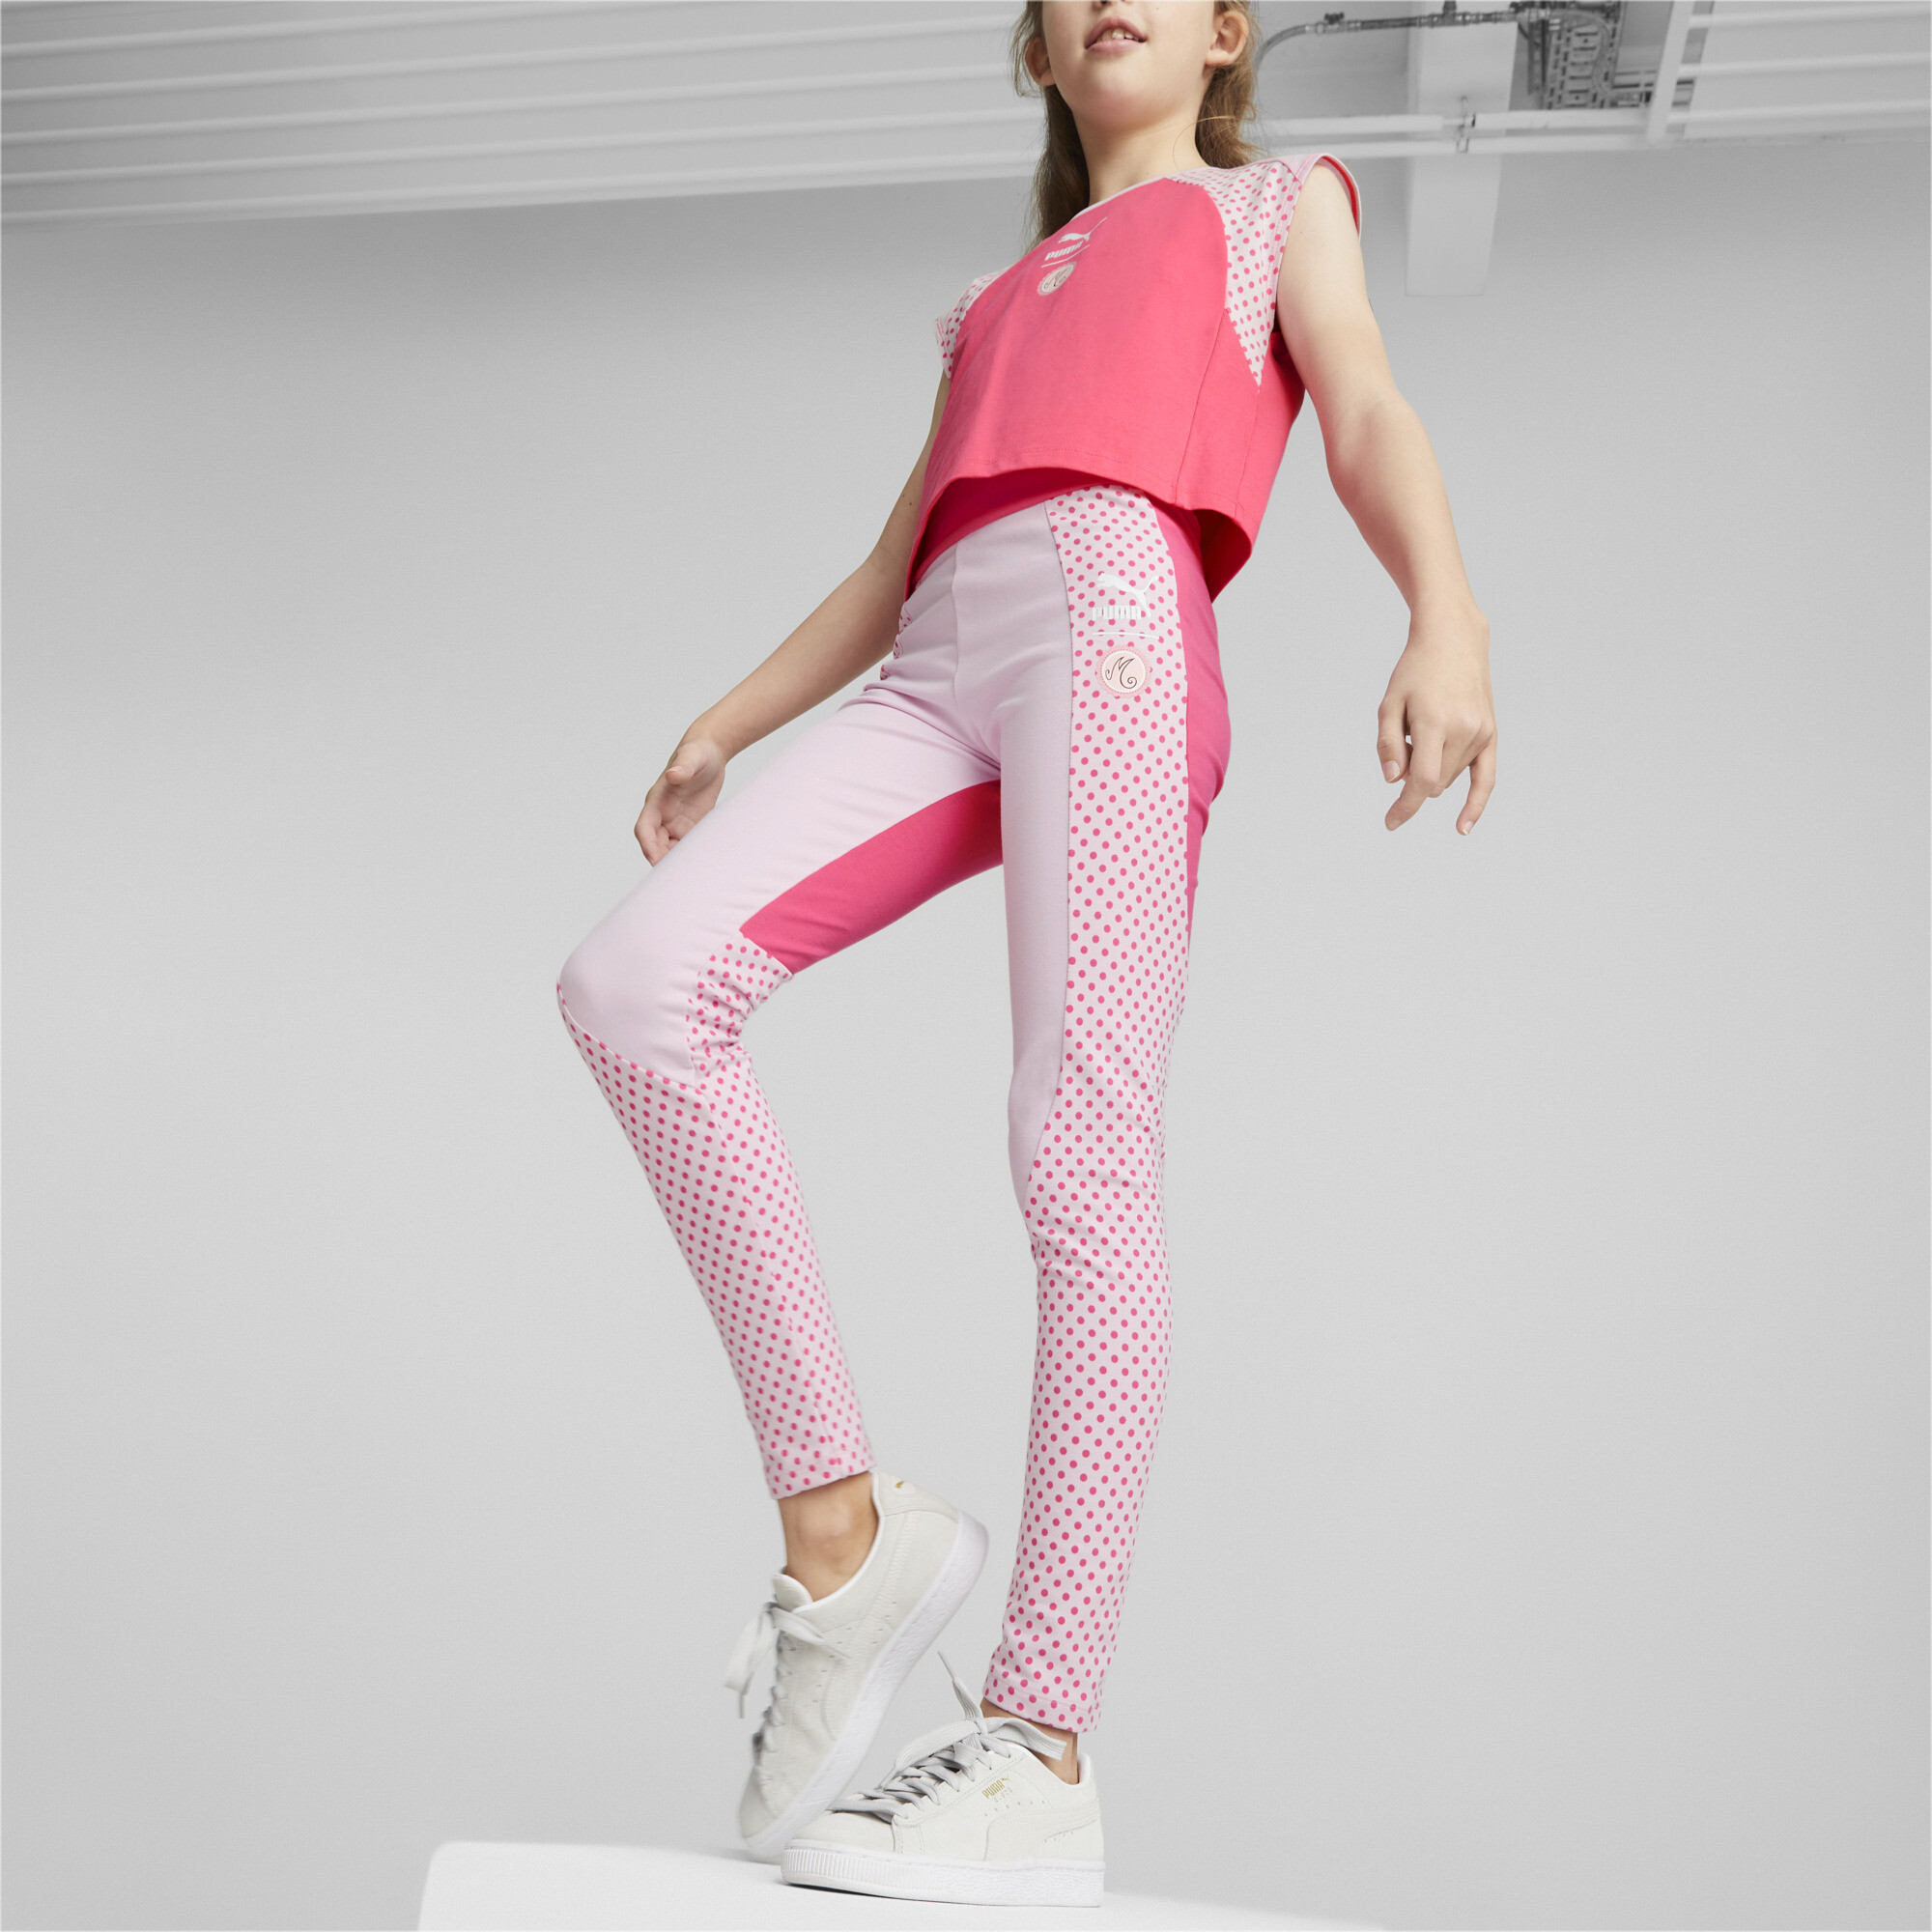 Puma X MIRACULOUS Leggings Youth, Pink, Size 15-16Y, Clothing